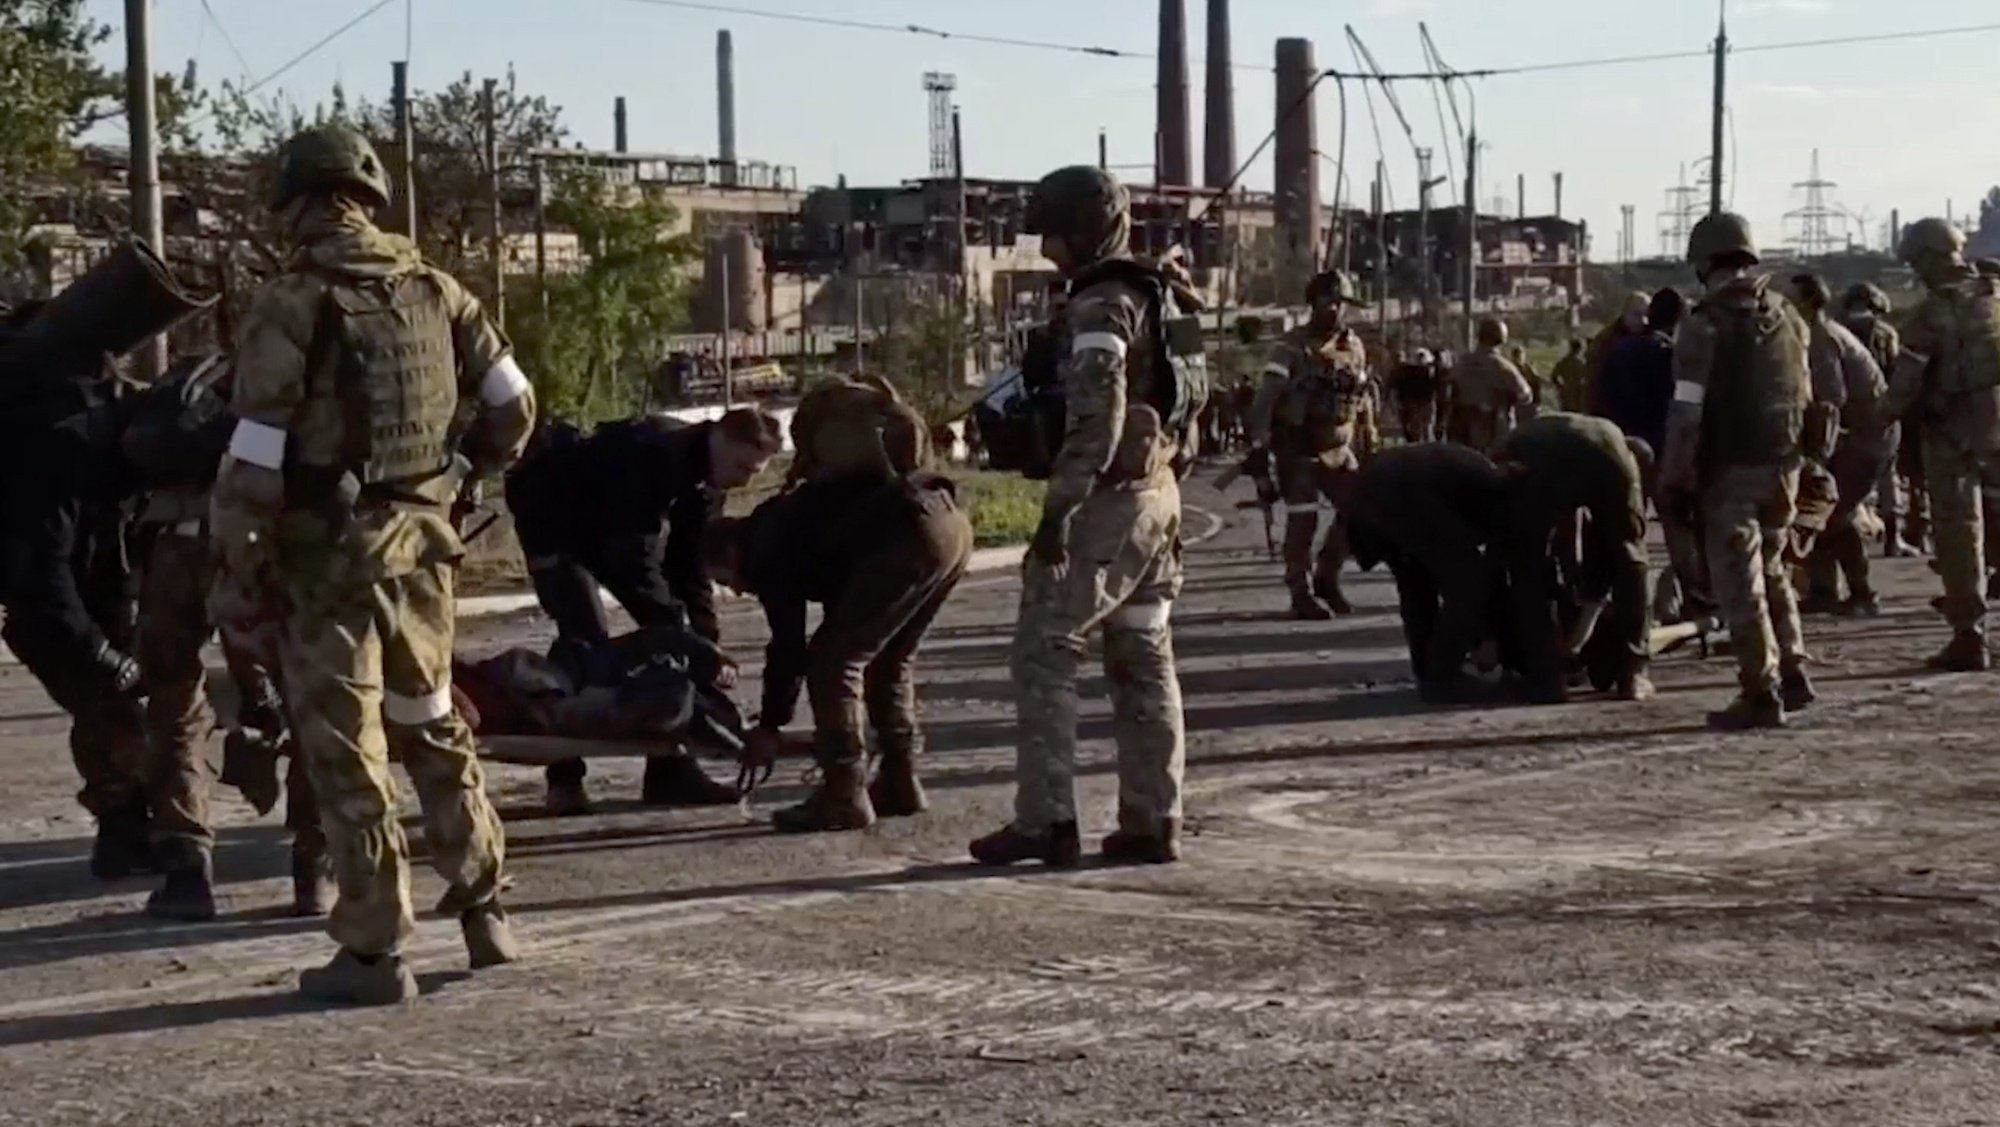 epa09952371 A handout still image taken from a handout video made available by the Russian Defence Ministry&#039;s press service shows Russian servicemen frisk Ukrainian servicemen as they are being evacuated from the besieged Azovstal steel plant in Mariupol, Ukraine, 17 May 2022. A total of 265 Ukrainian militants, including 51 seriously wounded, have laid down arms and surrendered to Russian forces, the Russian Ministry of Defence said on 17 May 2022. Those in need of medical assistance were sent for treatment to a hospital in Novoazovsk, the ministry states further. Russian President Putin on 21 April 2022 ordered his Defence Minister to not storm but to blockade the plant where a number of Ukrainian fighters were holding out. On 24 February, Russian troops invaded Ukrainian territory starting a conflict that has provoked destruction and a humanitarian crisis. According to the UNHCR, more than six million refugees have fled Ukraine, and a further 7.7 million people have been displaced internally within Ukraine since.  EPA/RUSSIAN DEFENCE MINISTRY PRESS SERVICE HANDOUT  BEST QUALITY AVAILABLE HANDOUT EDITORIAL USE ONLY/NO SALES